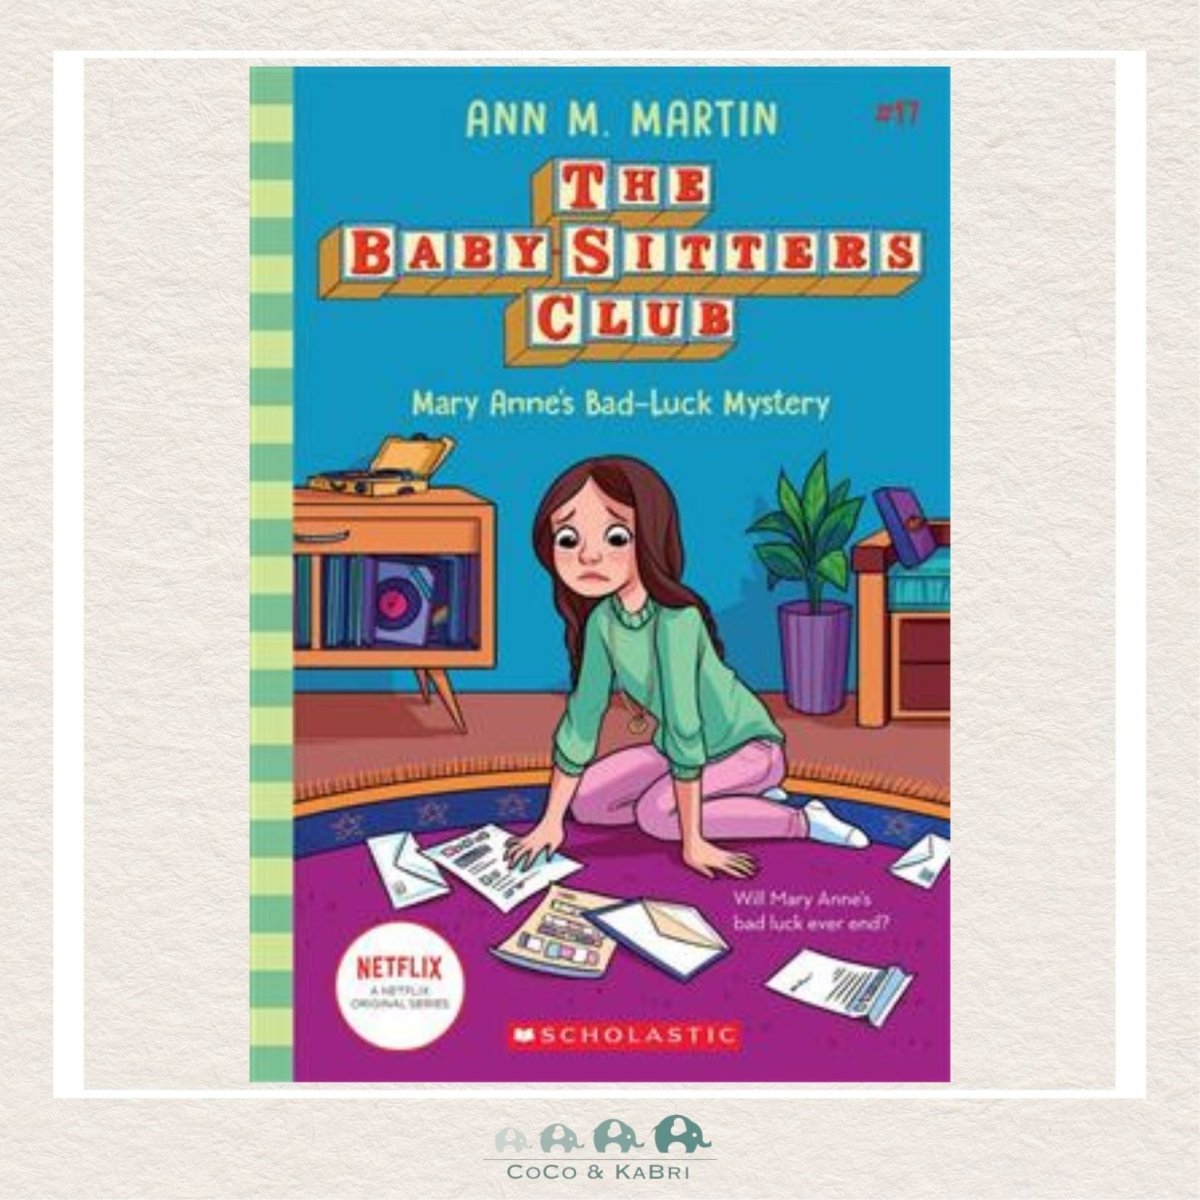 Mary Anne's Bad Luck Mystery (The Baby-Sitters Club #17), CoCo & KaBri Children's Boutique